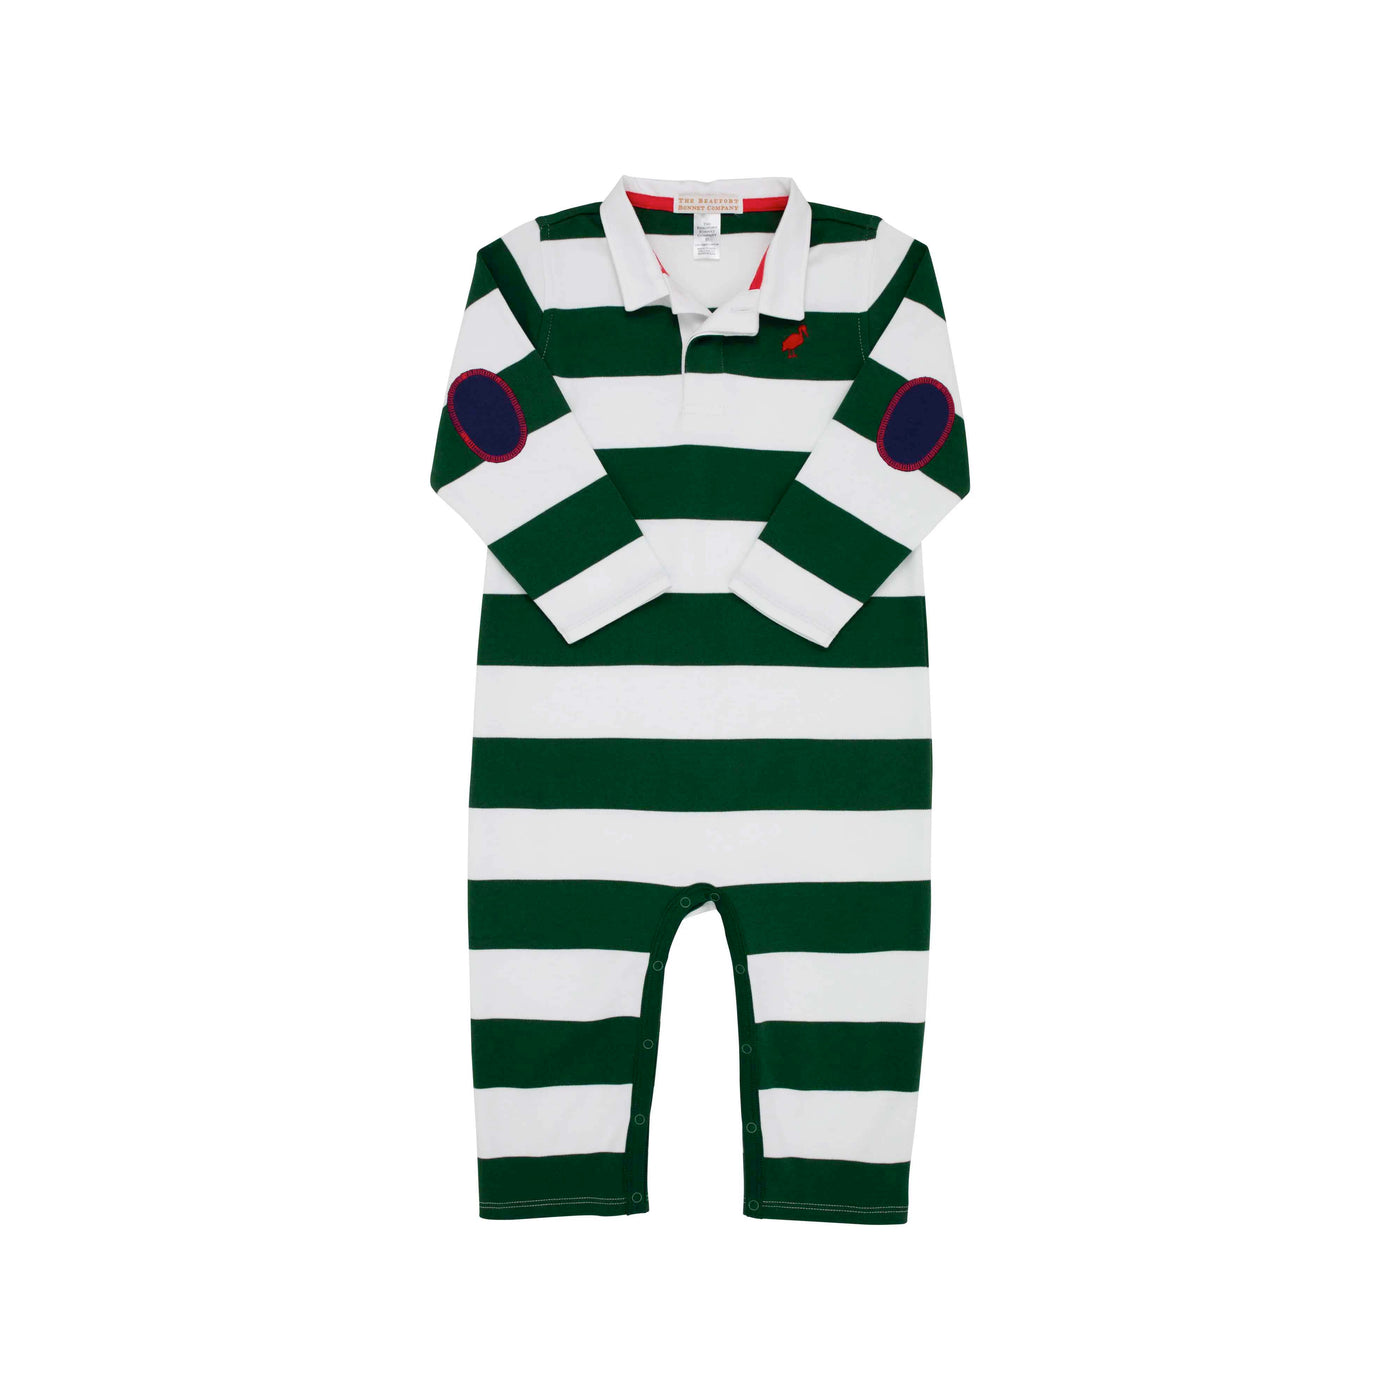 Sir Propers Rugby Romper - Grier Green Stripe With Nantucket Navy Elbow Patches & Richmond Red Piping